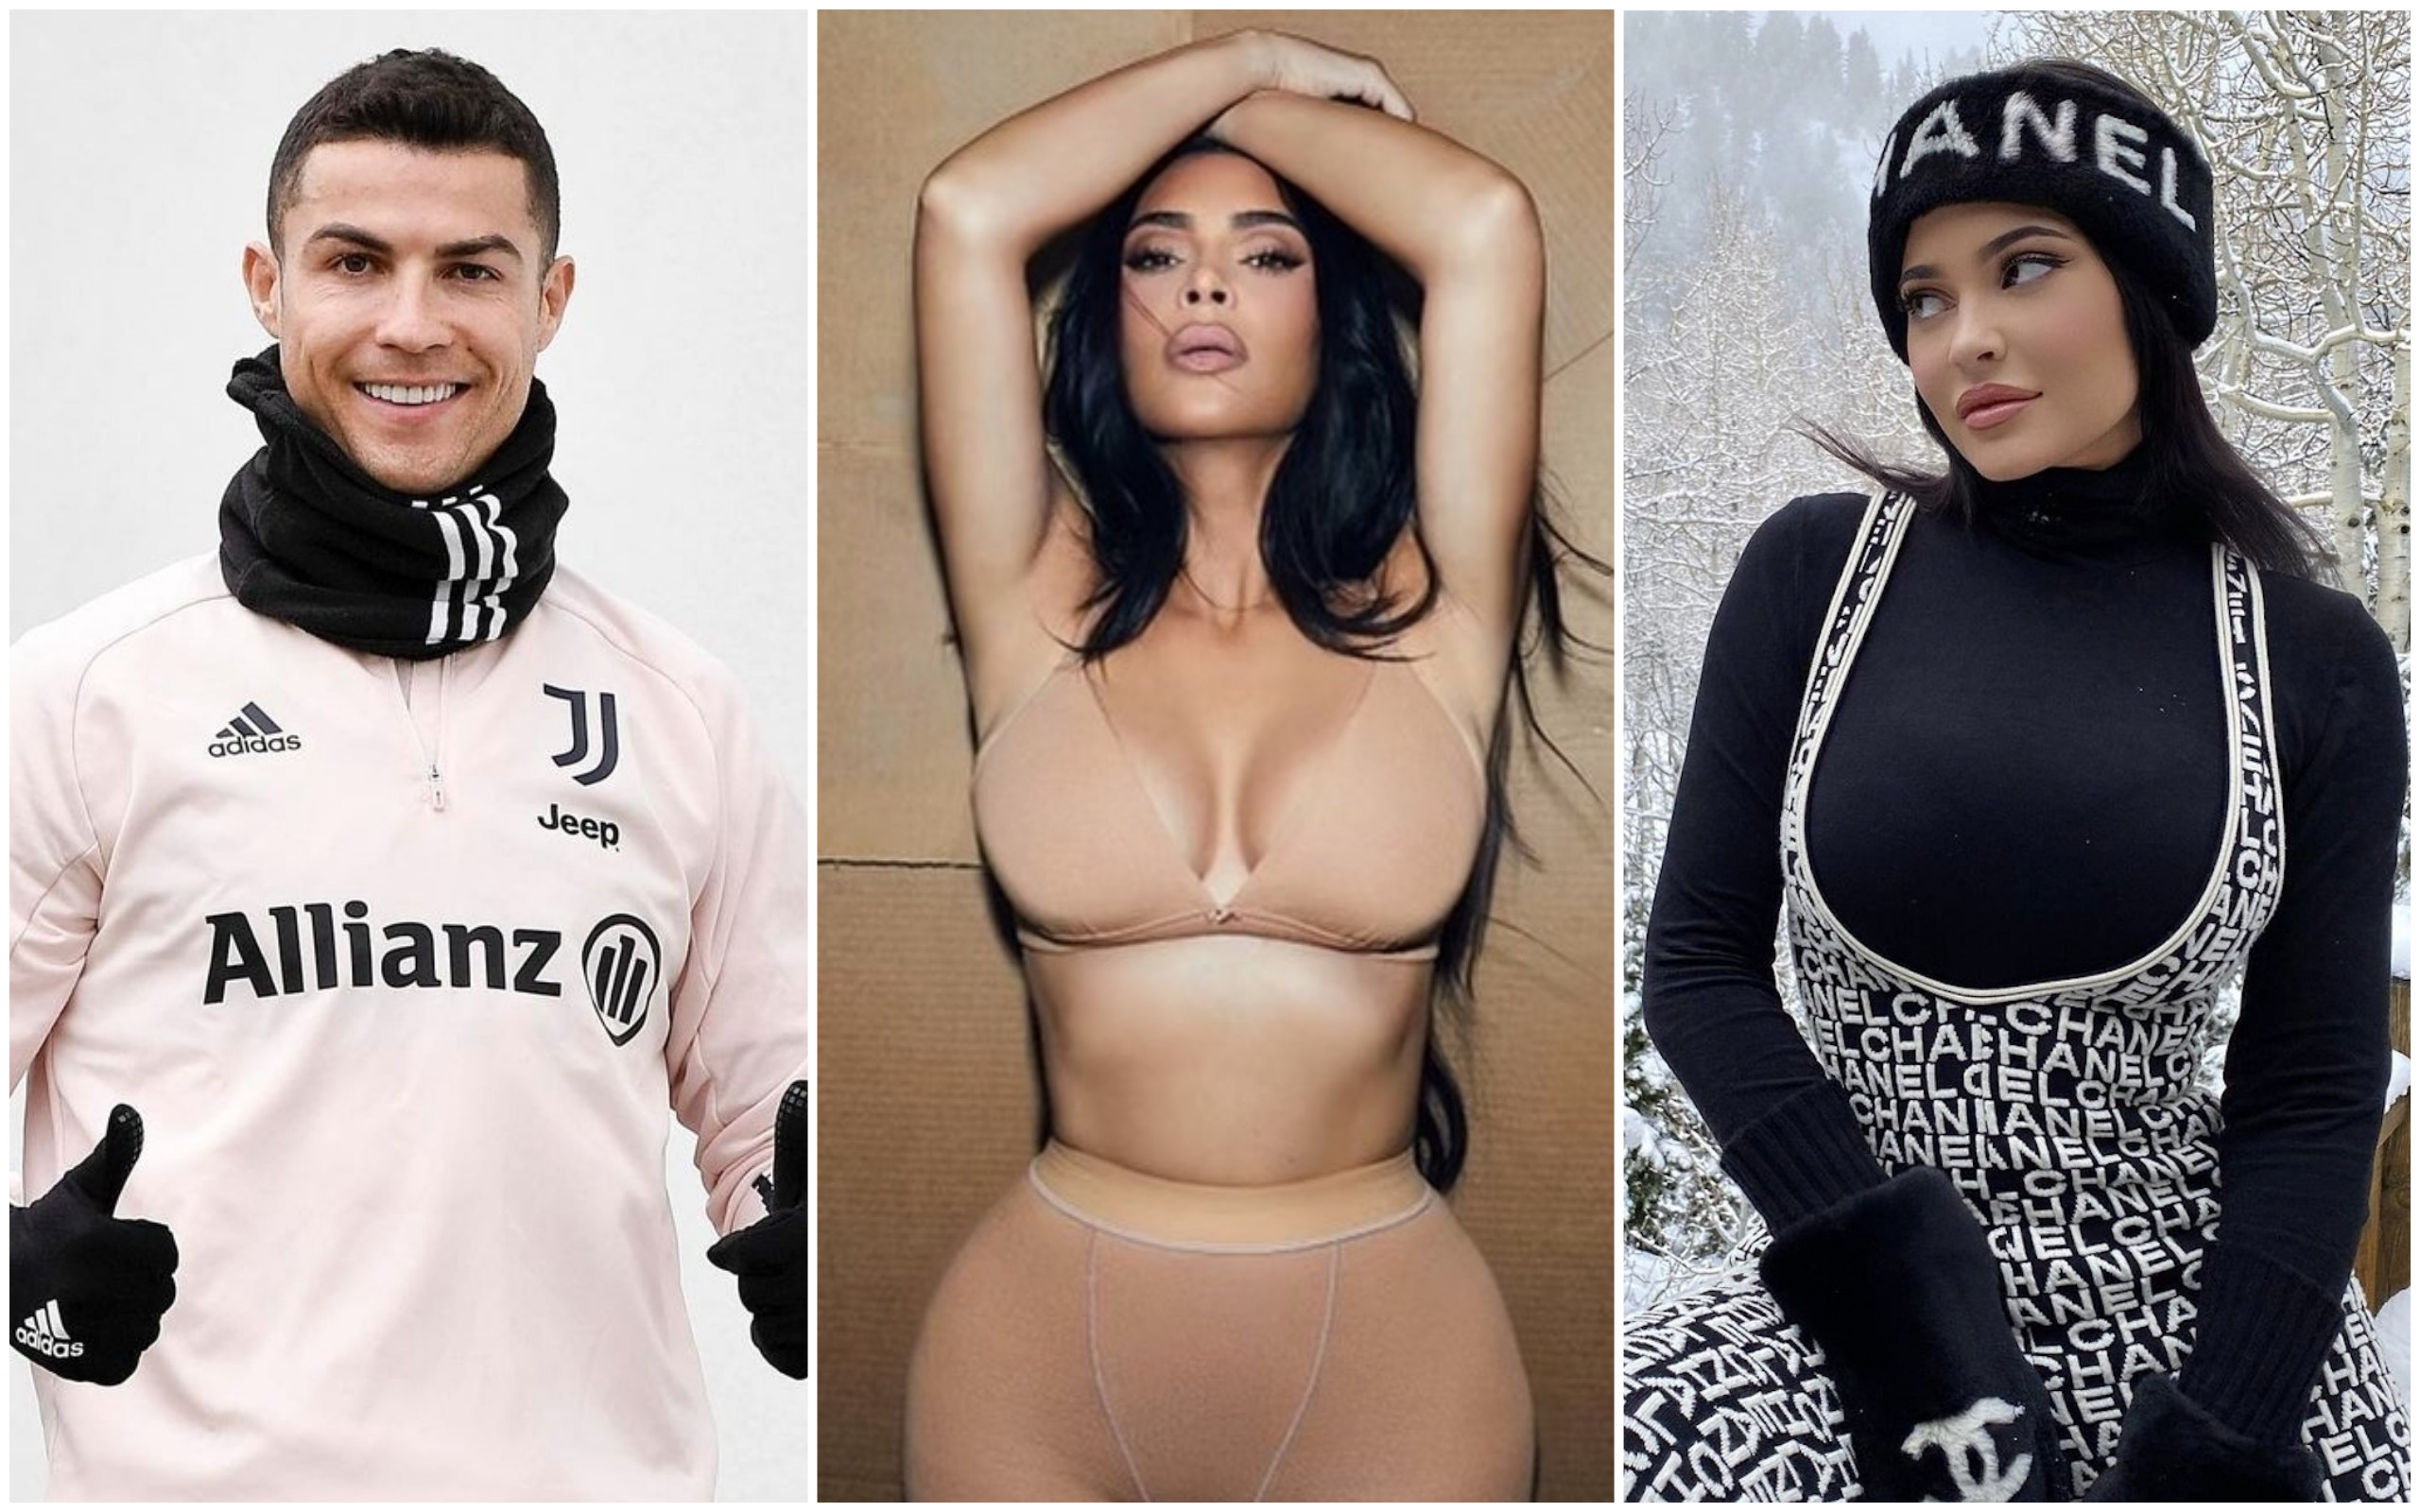 Cristiano Ronaldo, Kylie Jenner and Kim Kardashian: three of the A-list celebs to make it into Instagram’s highest earners per post list for 2021. Photo: @cristiano, @kimkardashian, @kyliejenner/Instagram